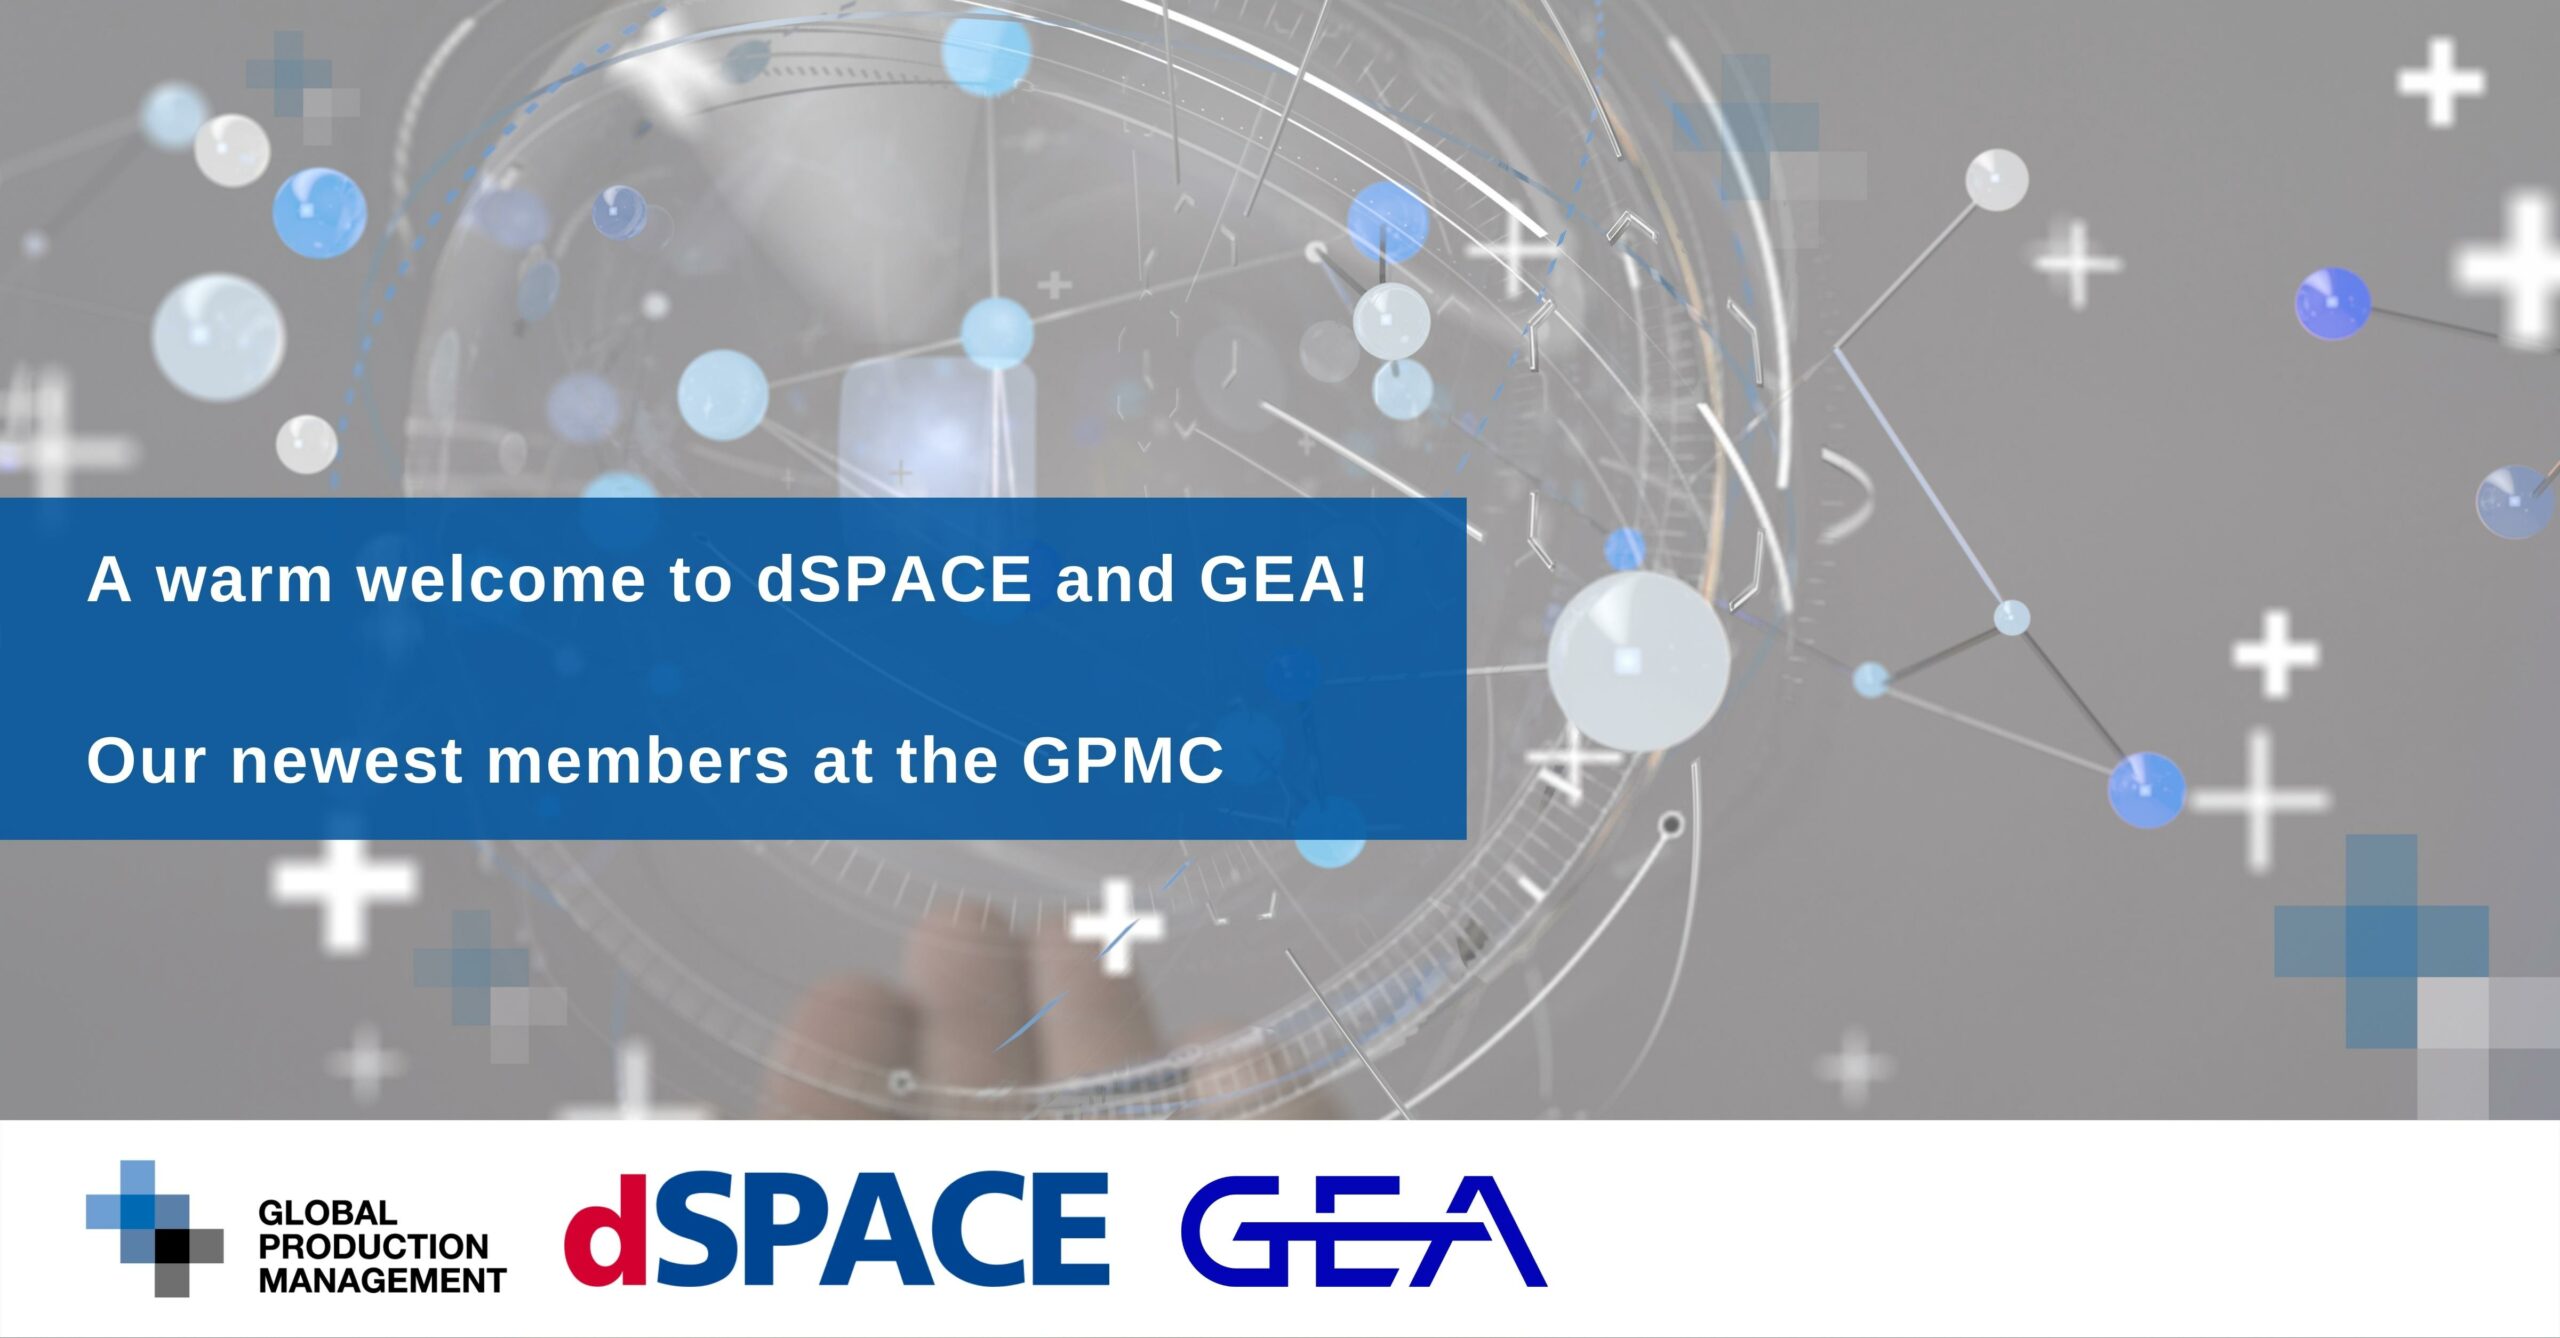 A-warm-welcome-to-dSPACE-and-GEA-our-newest-members-at-the-GPMC-scaled Welcome dSPACE and GEA!  